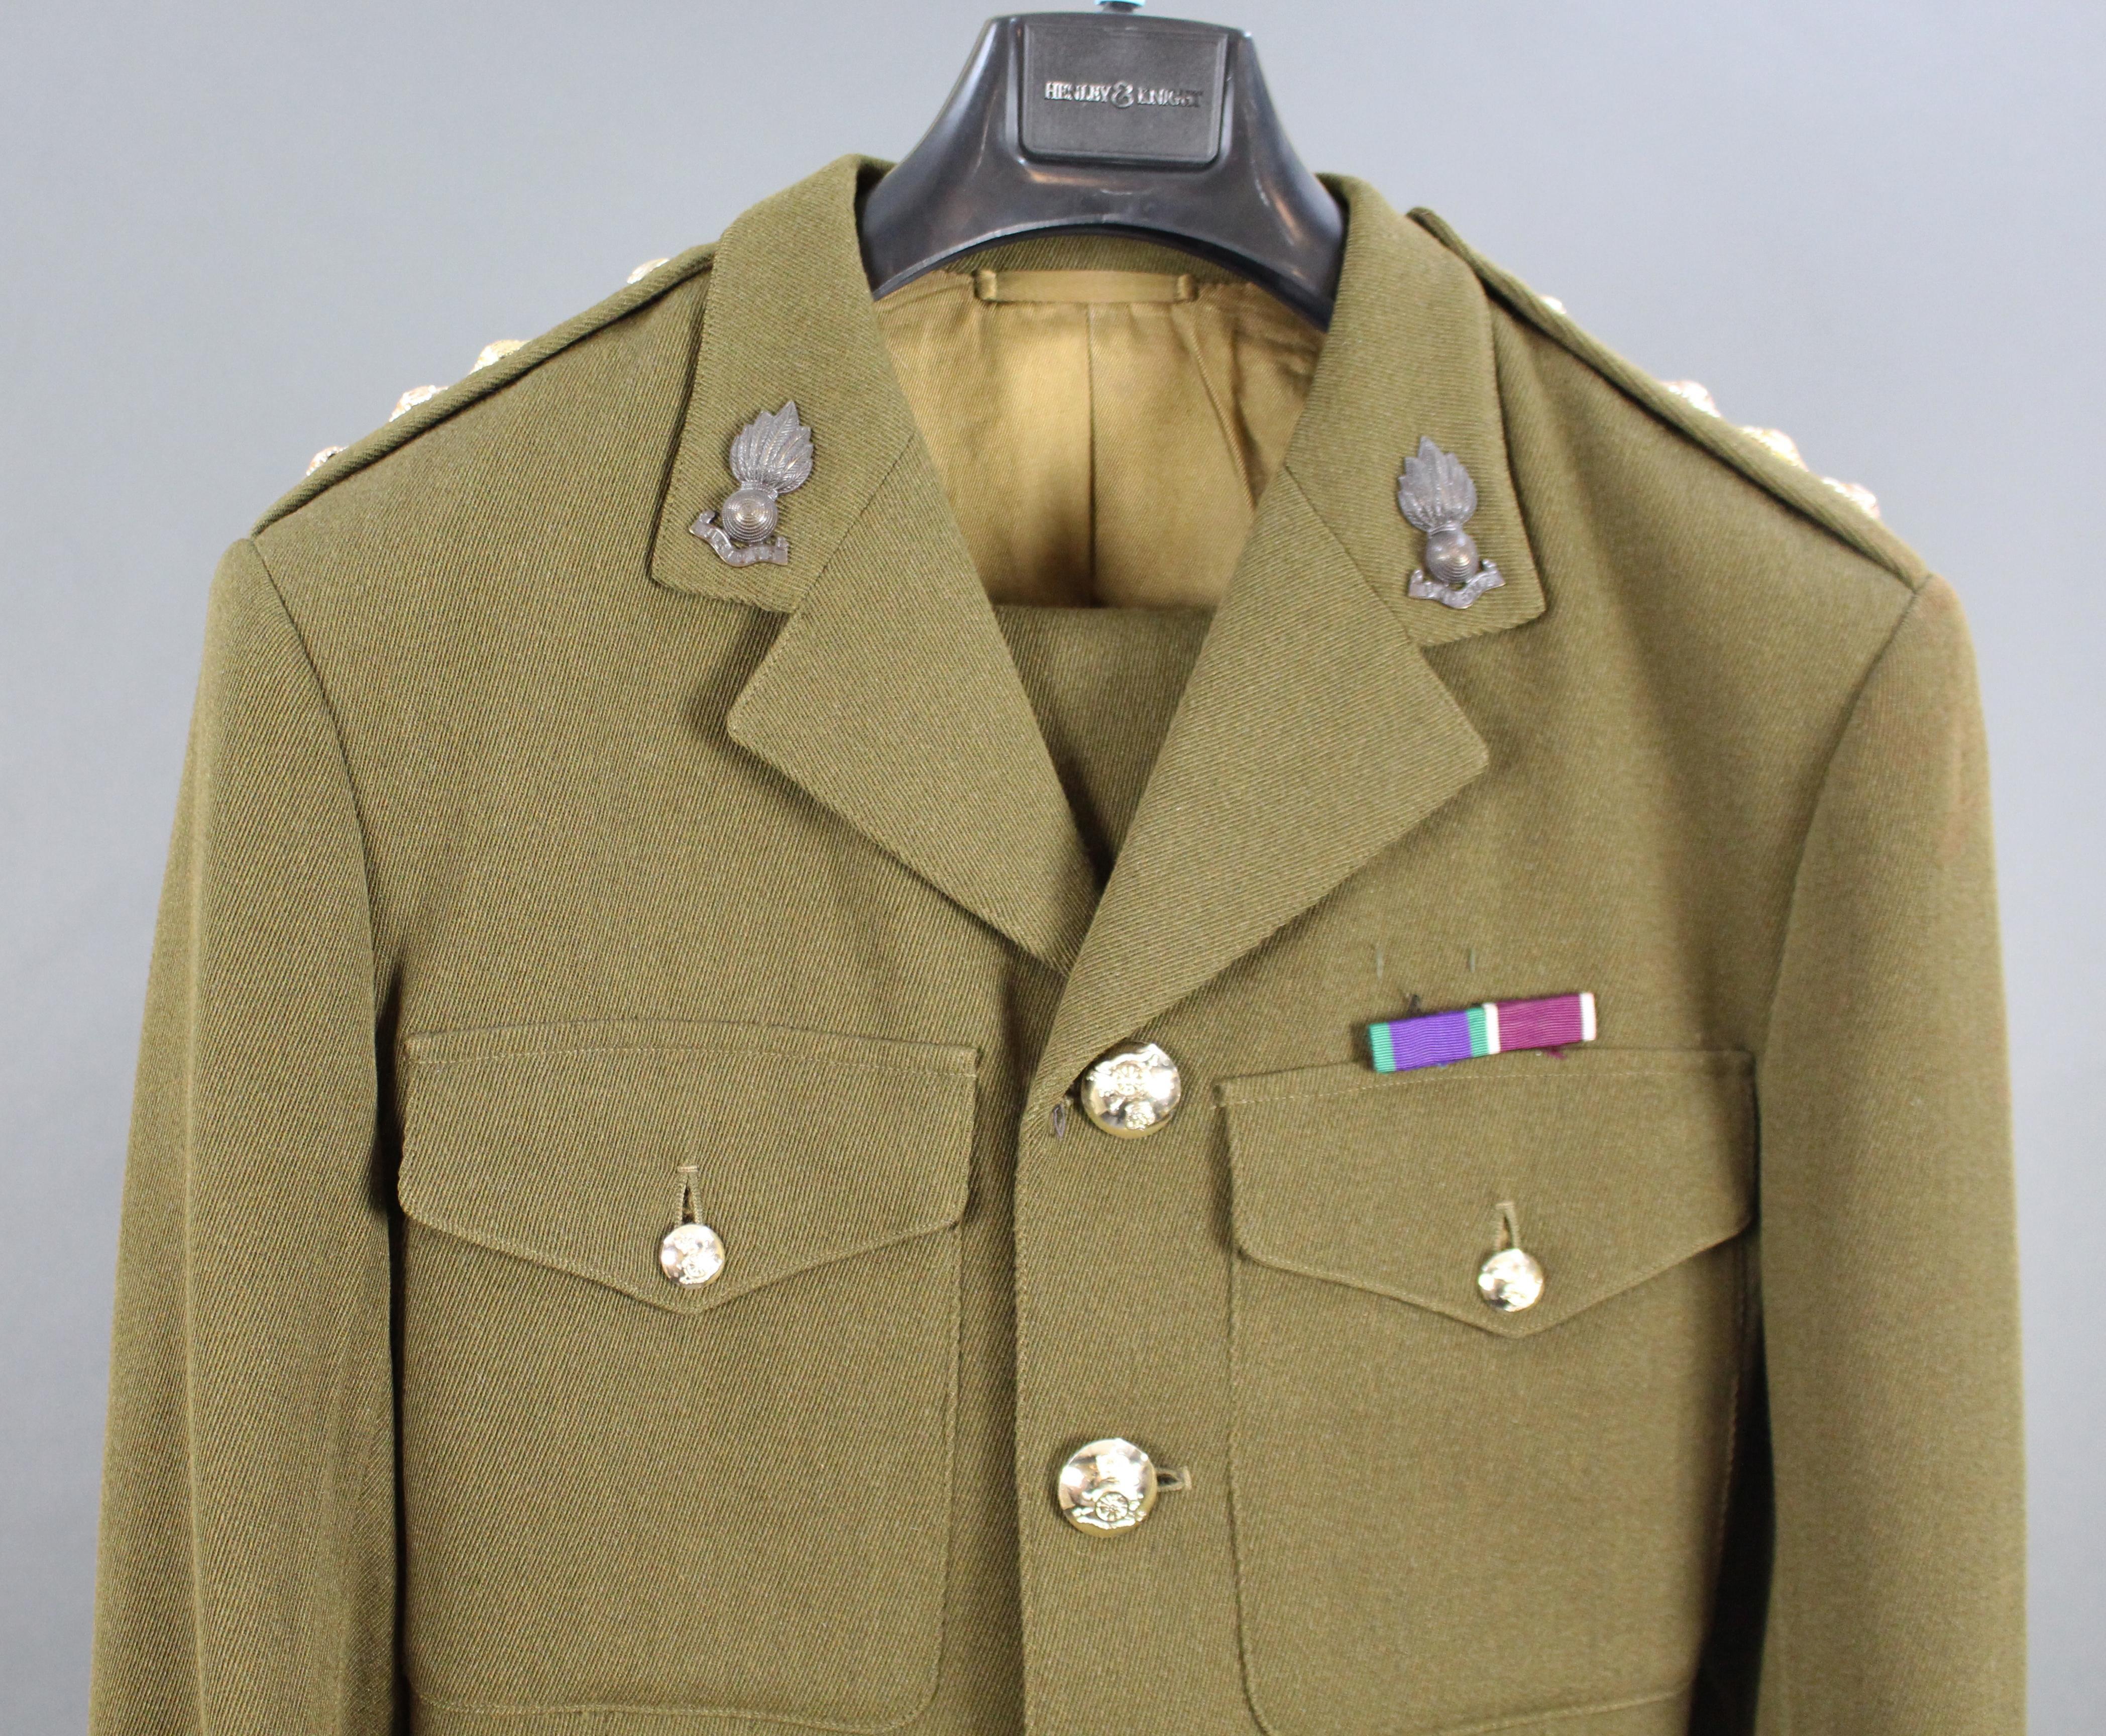 Period Artillery Uniform
Maker Gieves & Hawkes
Rank Captain
Condition: Very good condition. One or two pulls to the thread
Underarm length 20 in
Arm (shoulder - cuff) 27 in
Back (shoulder - shoulder) 18 in
Length (seam - hem) 33 in
Trousers